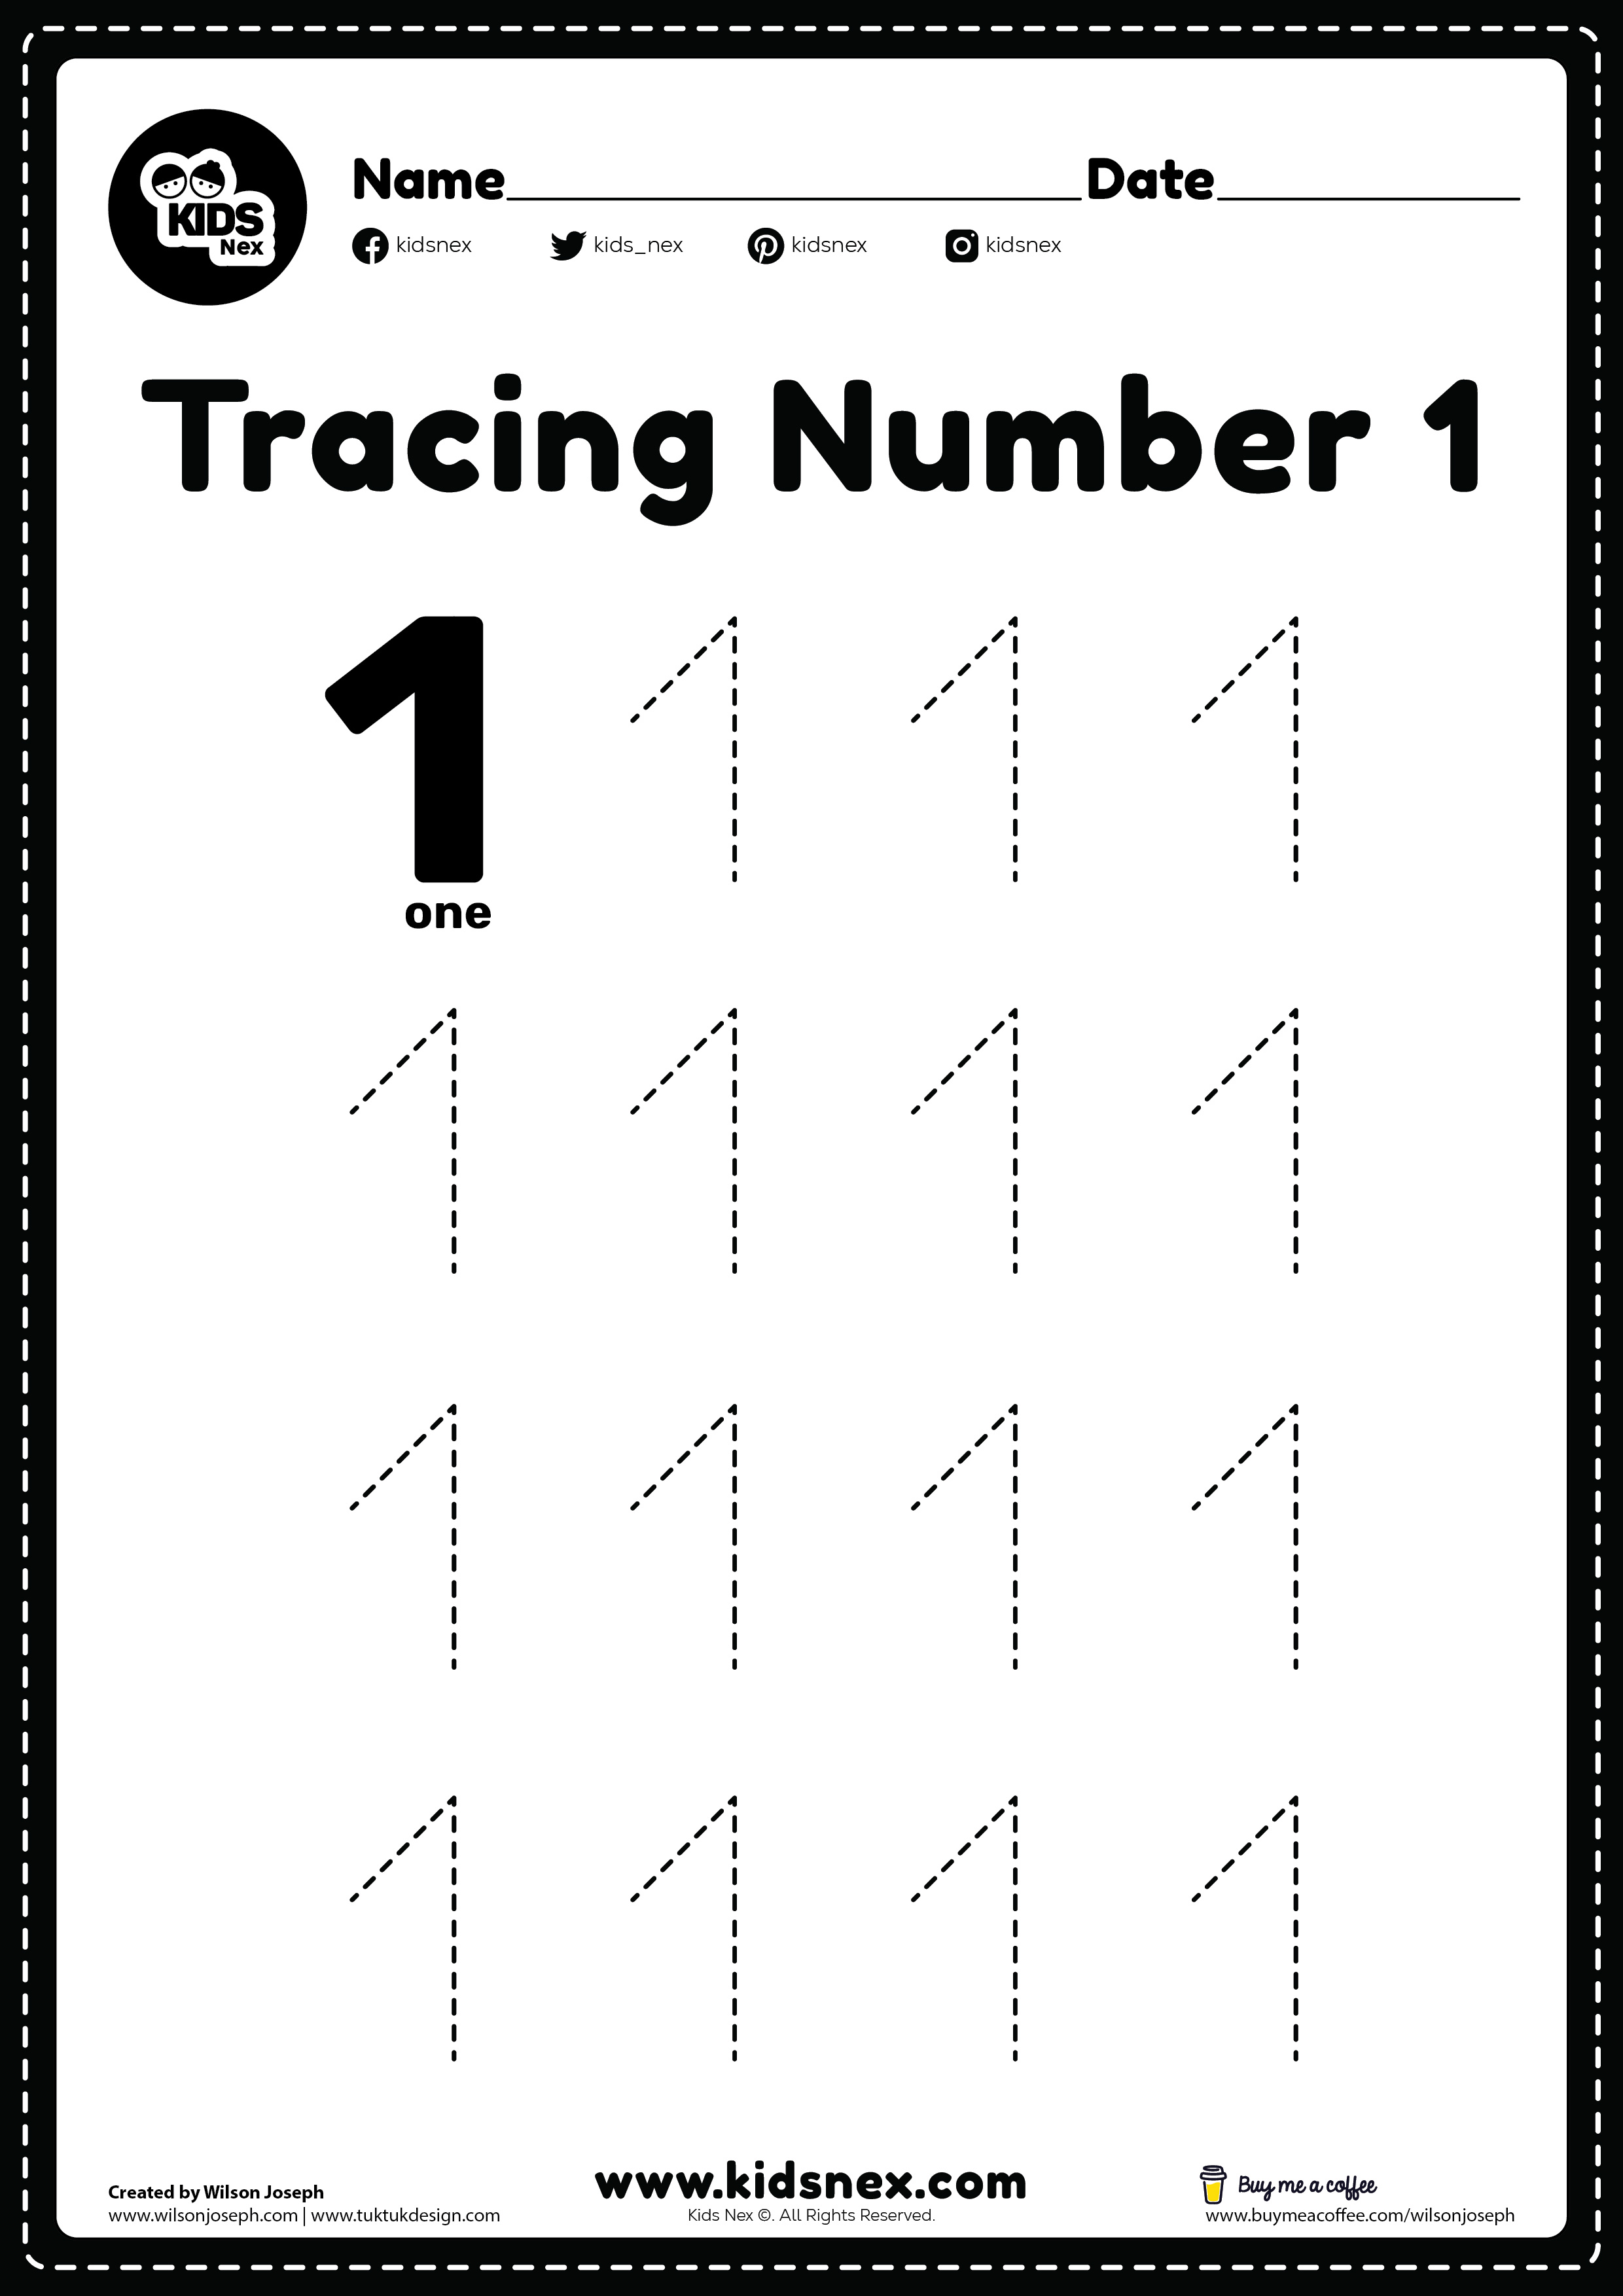 Number-1 tracing worksheet for preschool and kindergarten kids for tracing practice in a free printable pdf page.